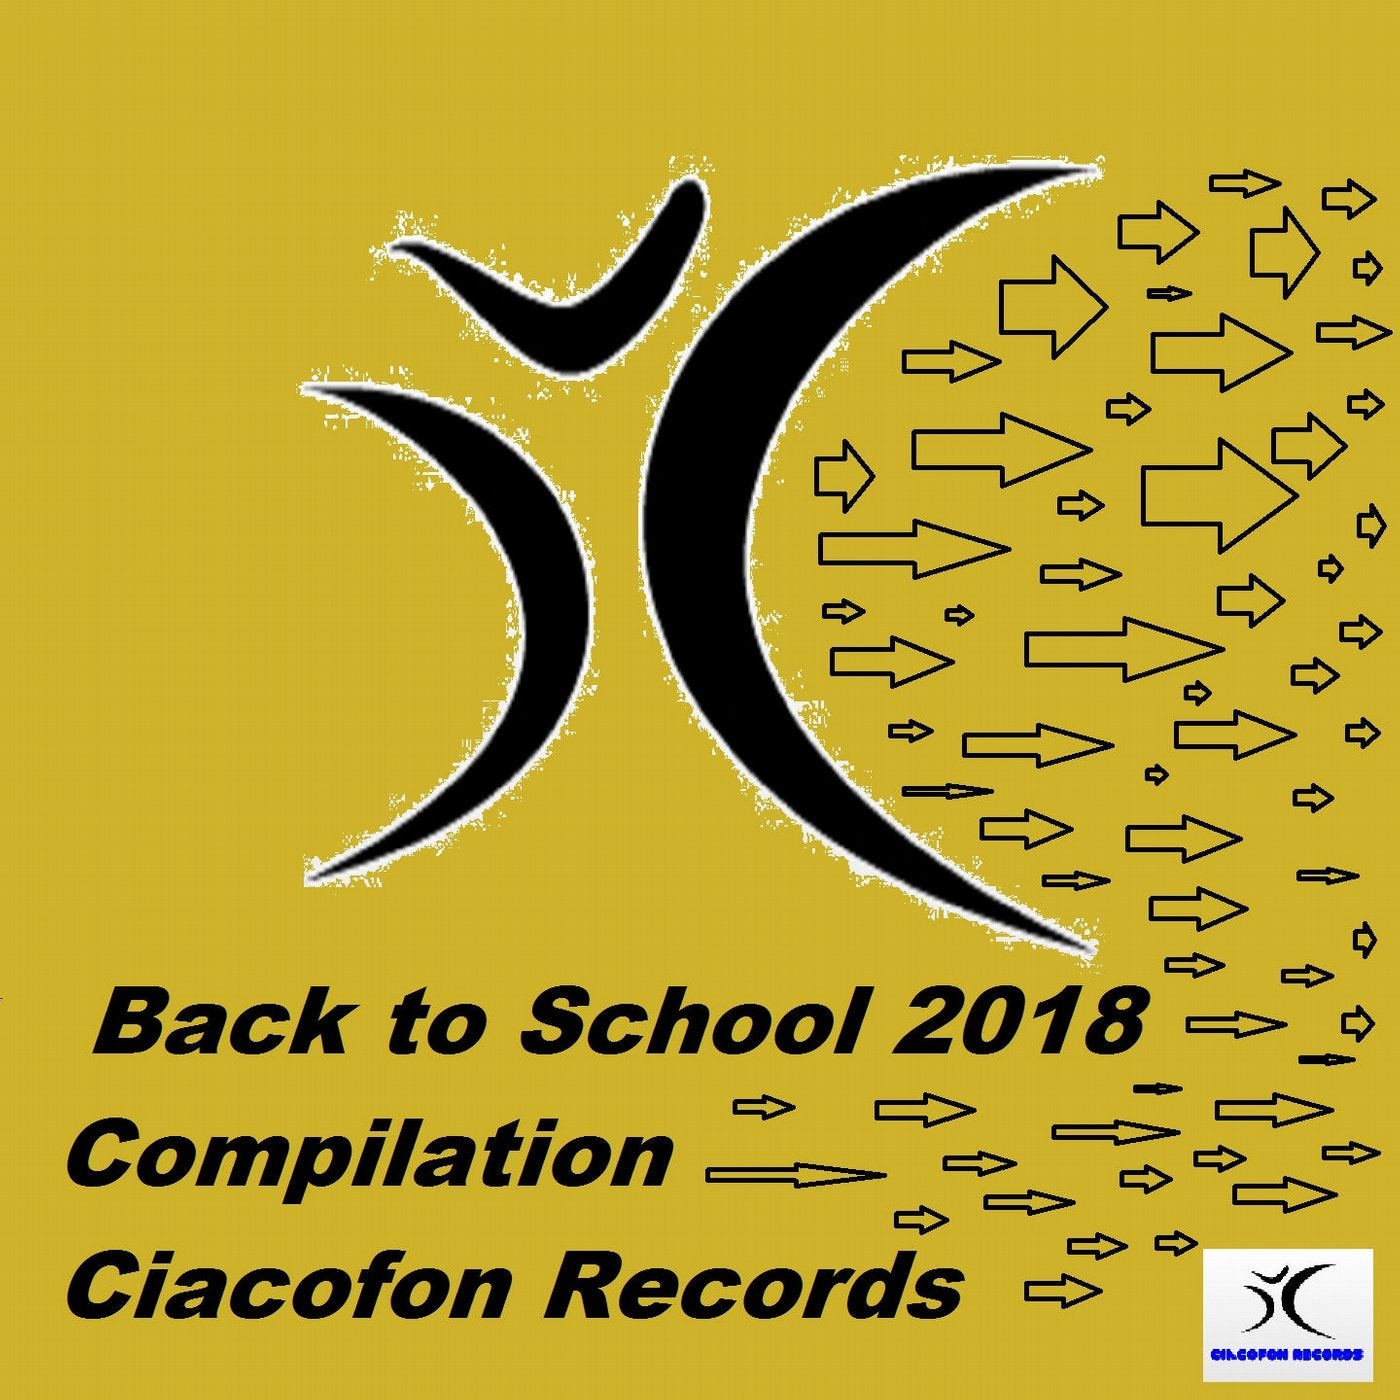 Back to School 2018 Compilation